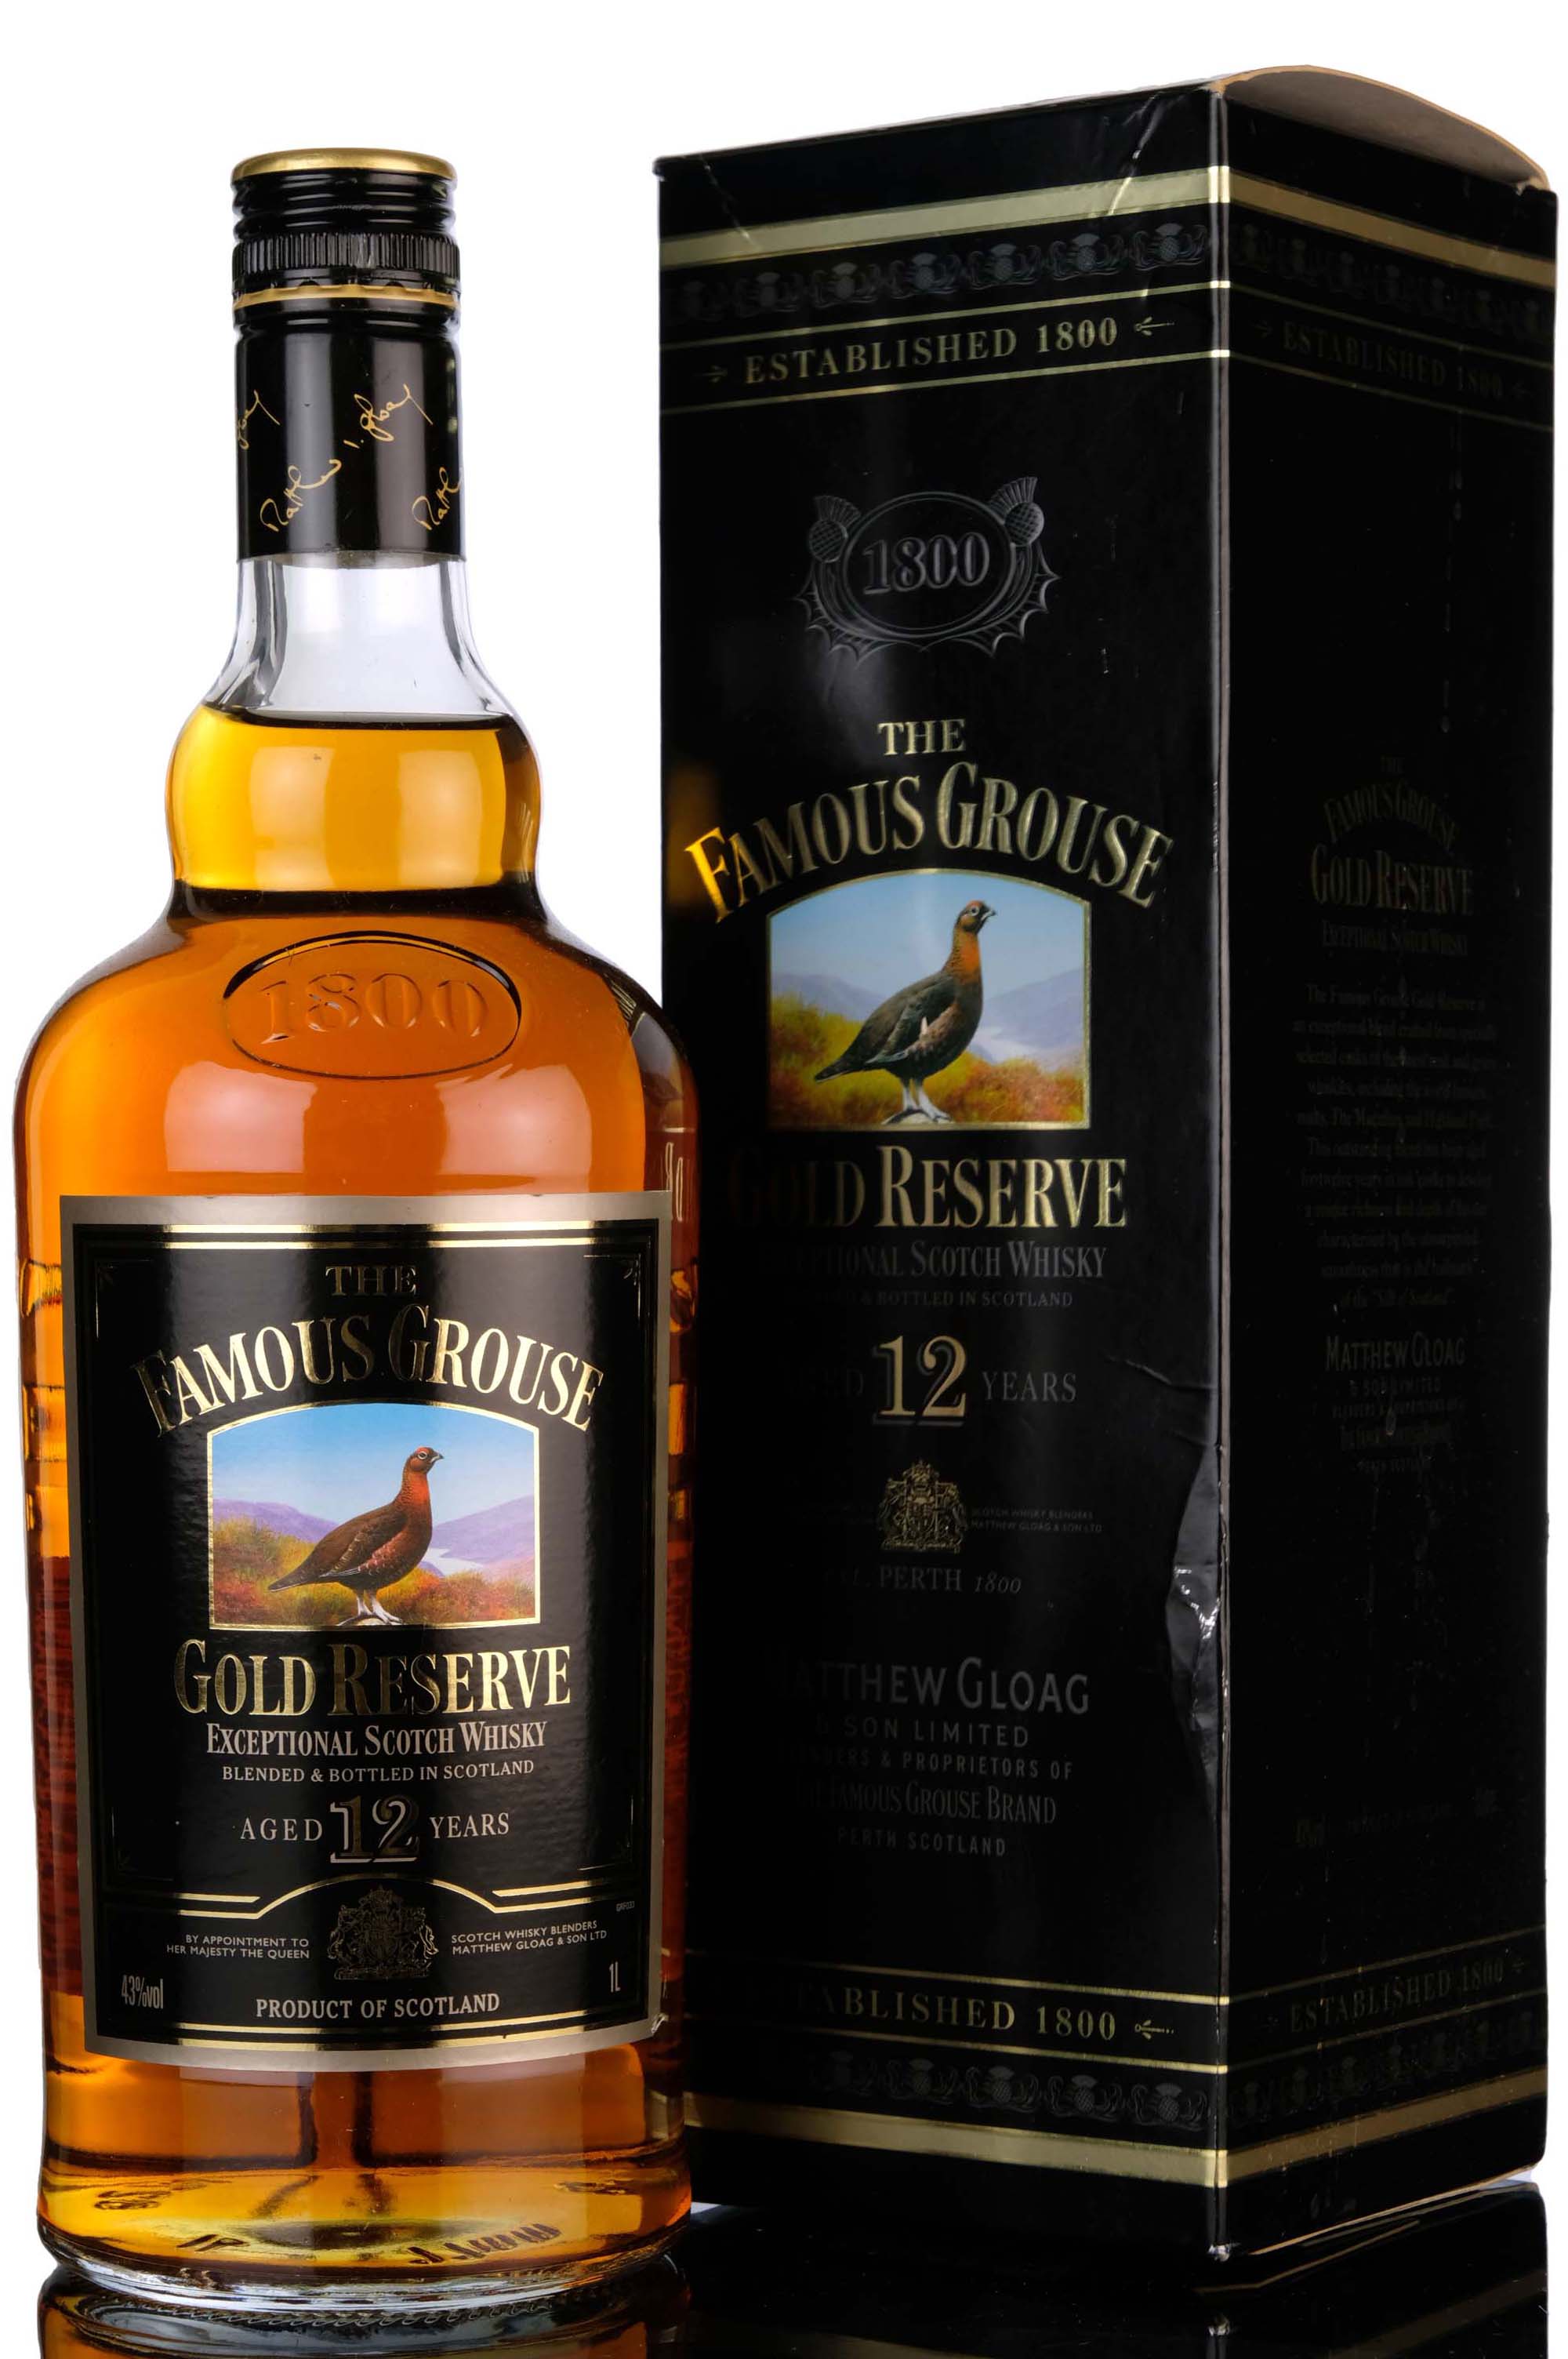 Famous Grouse 12 Year Old - Gold Reserve - 1 Litre